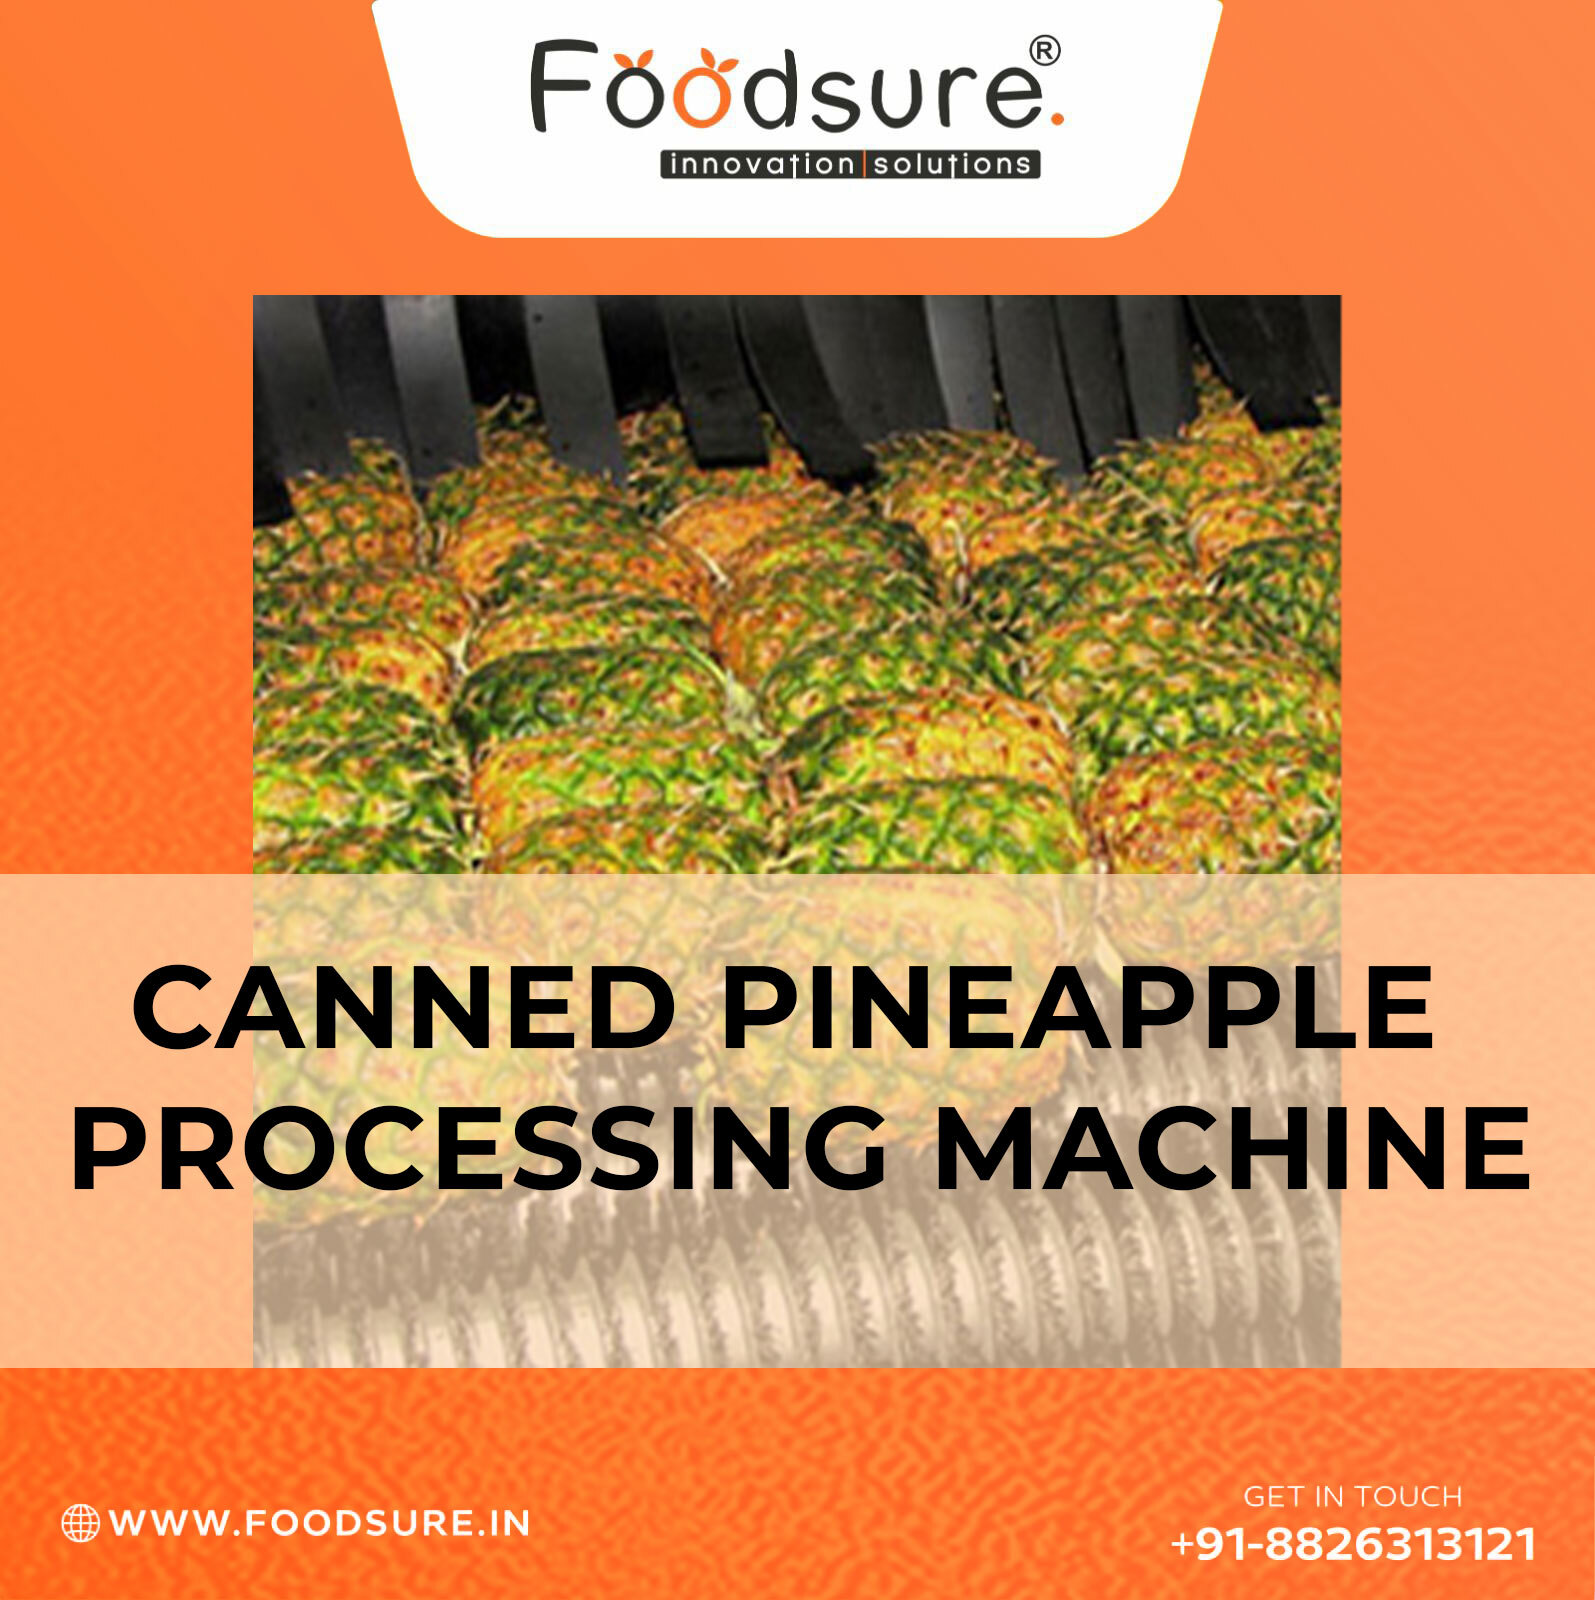 Canned Pineapple Processing Machine